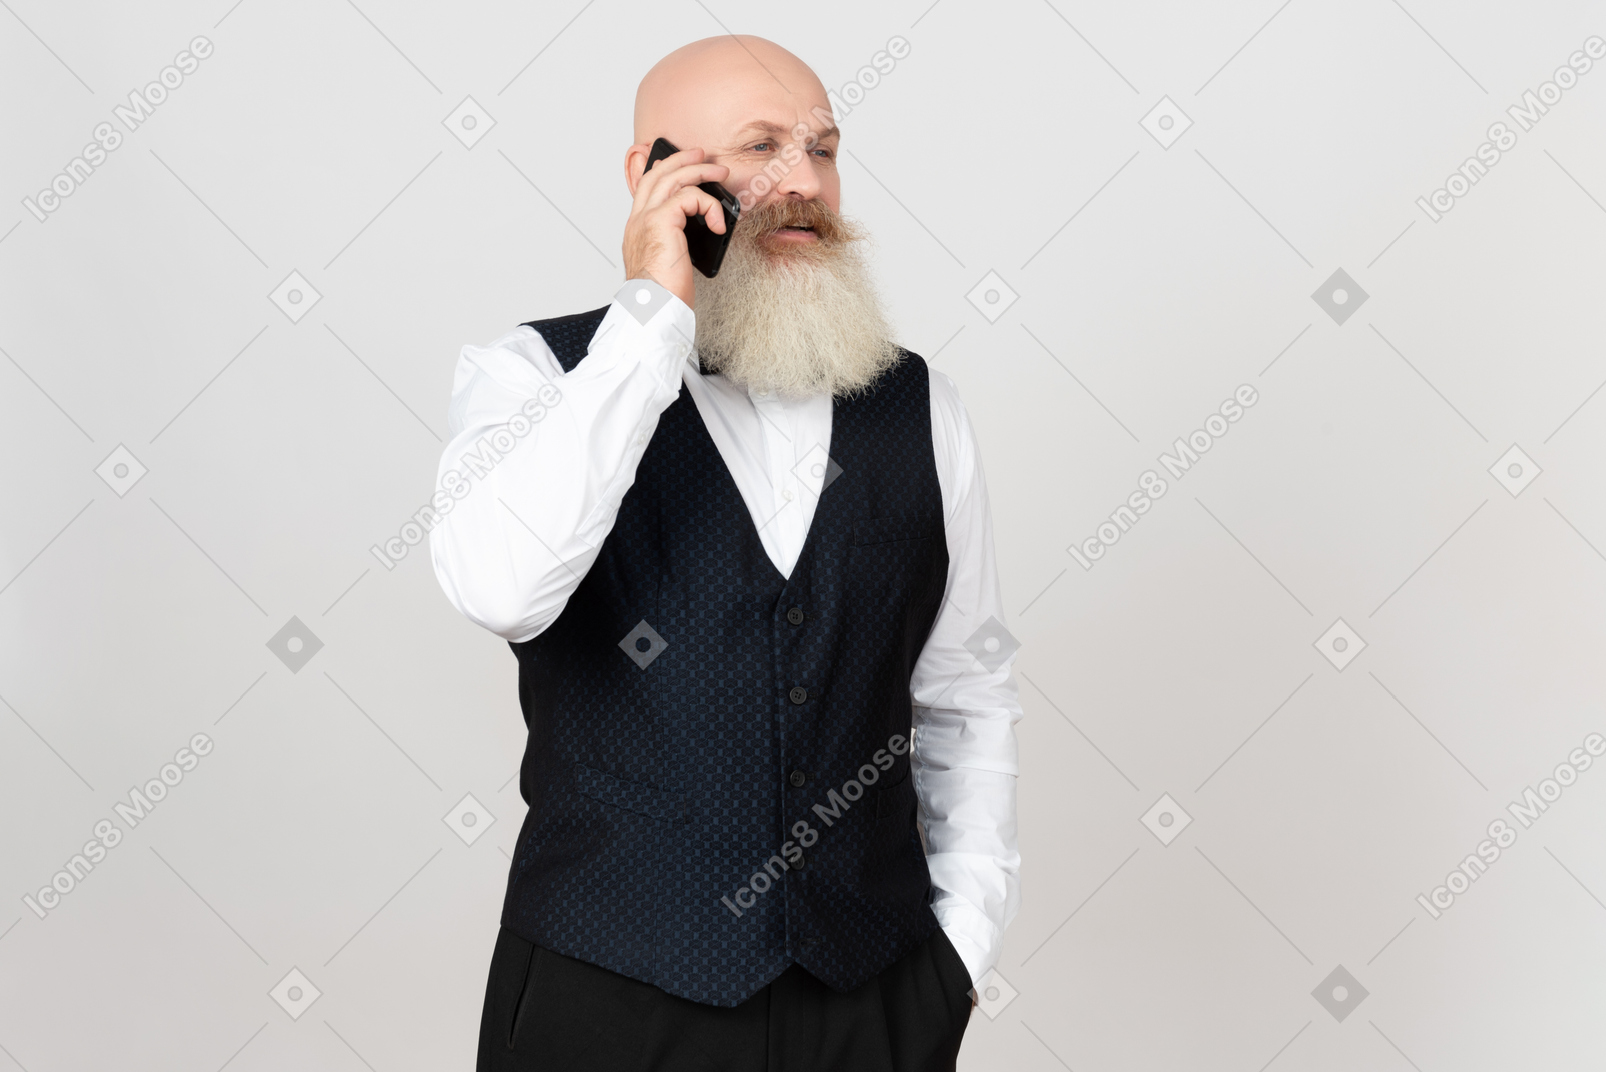 Aged man involved in phone conversation